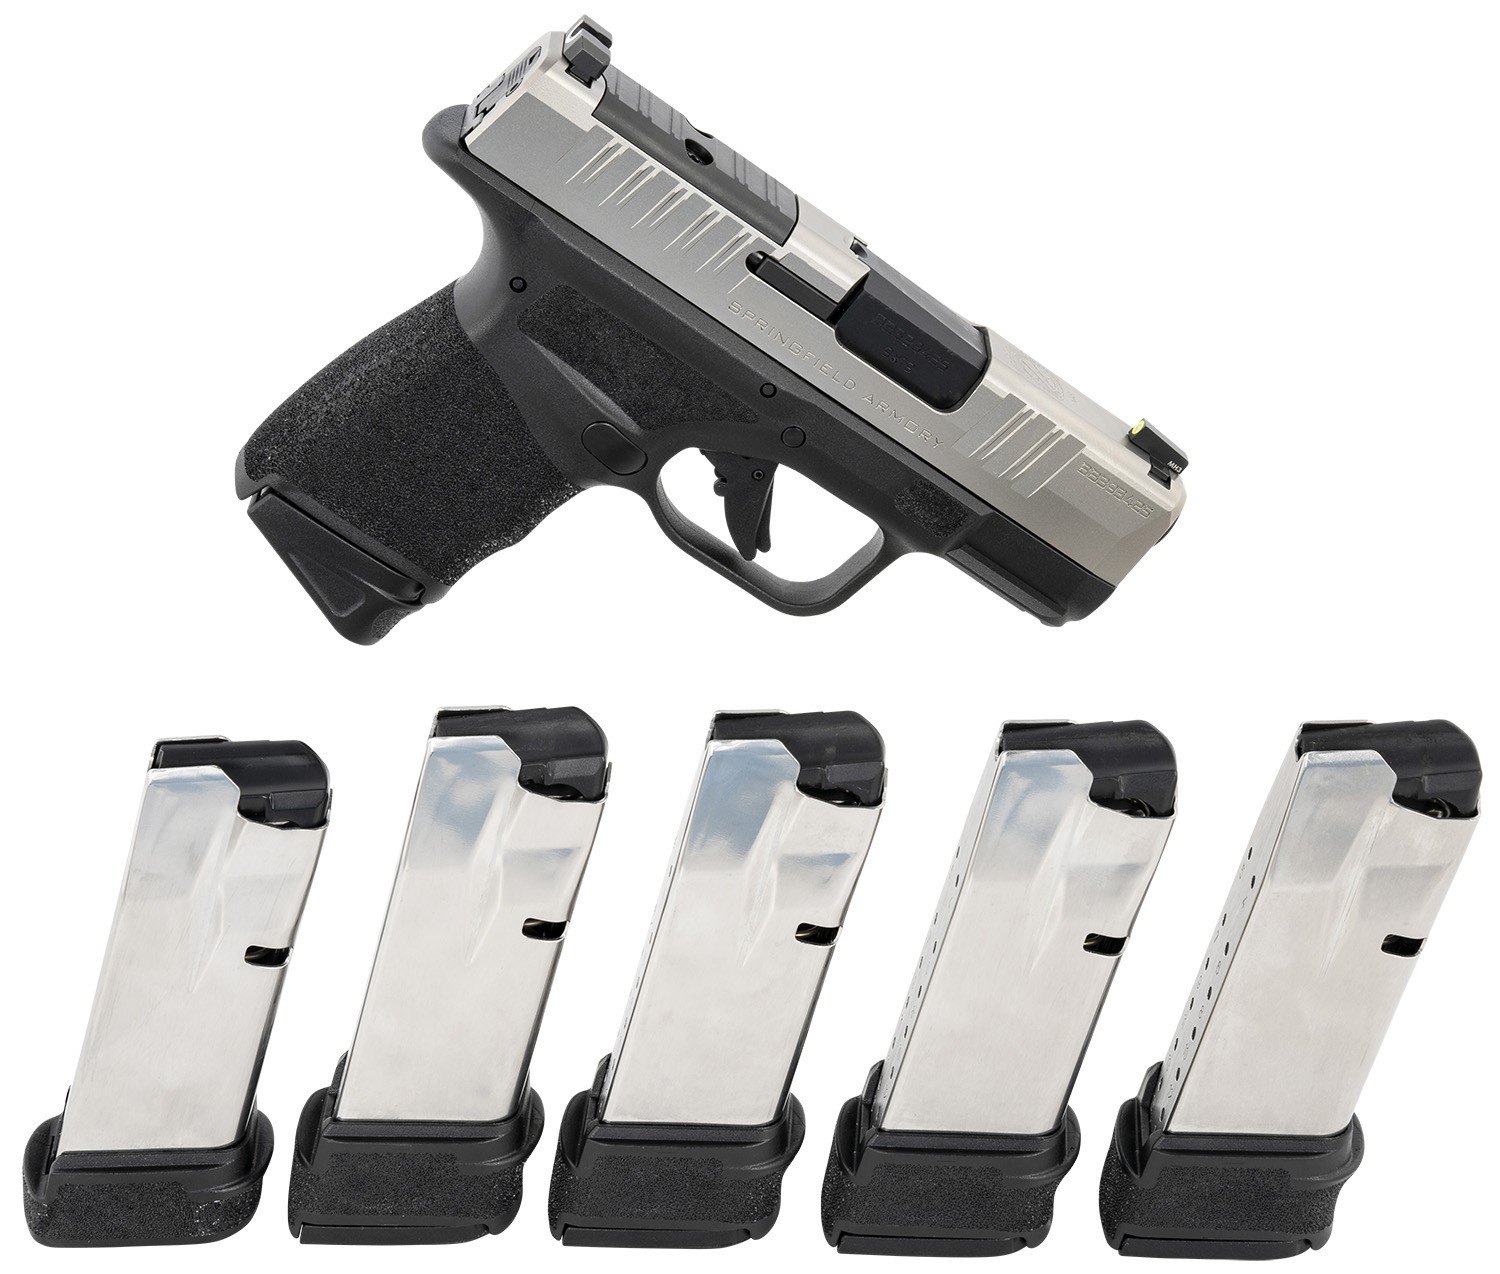 SPRINGFIELD ARMORY HELLCAT, 9MM 3", STAINLESS/BLUE, 6-13RD MAGS, LIMITED EDITION